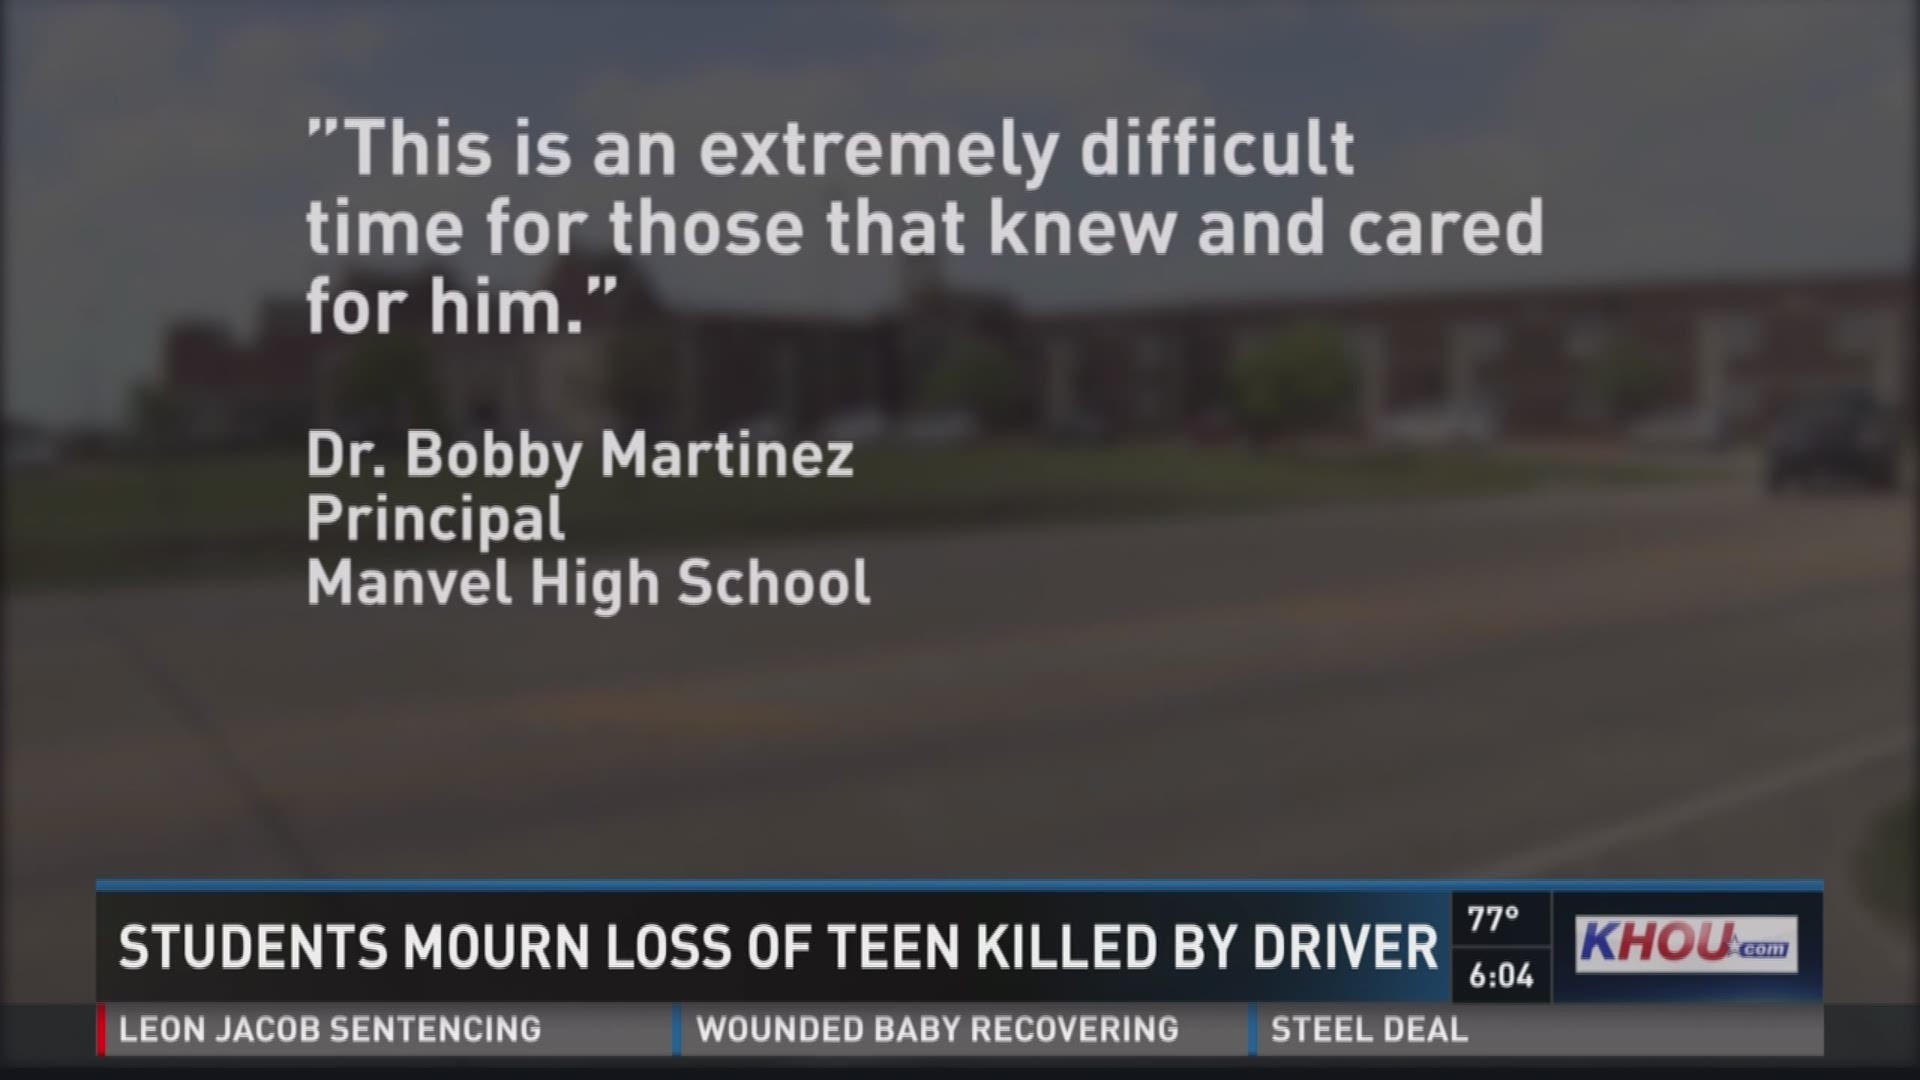 An 18-year-old Manvel High School student was killed by a driver Monday while he was walking to school